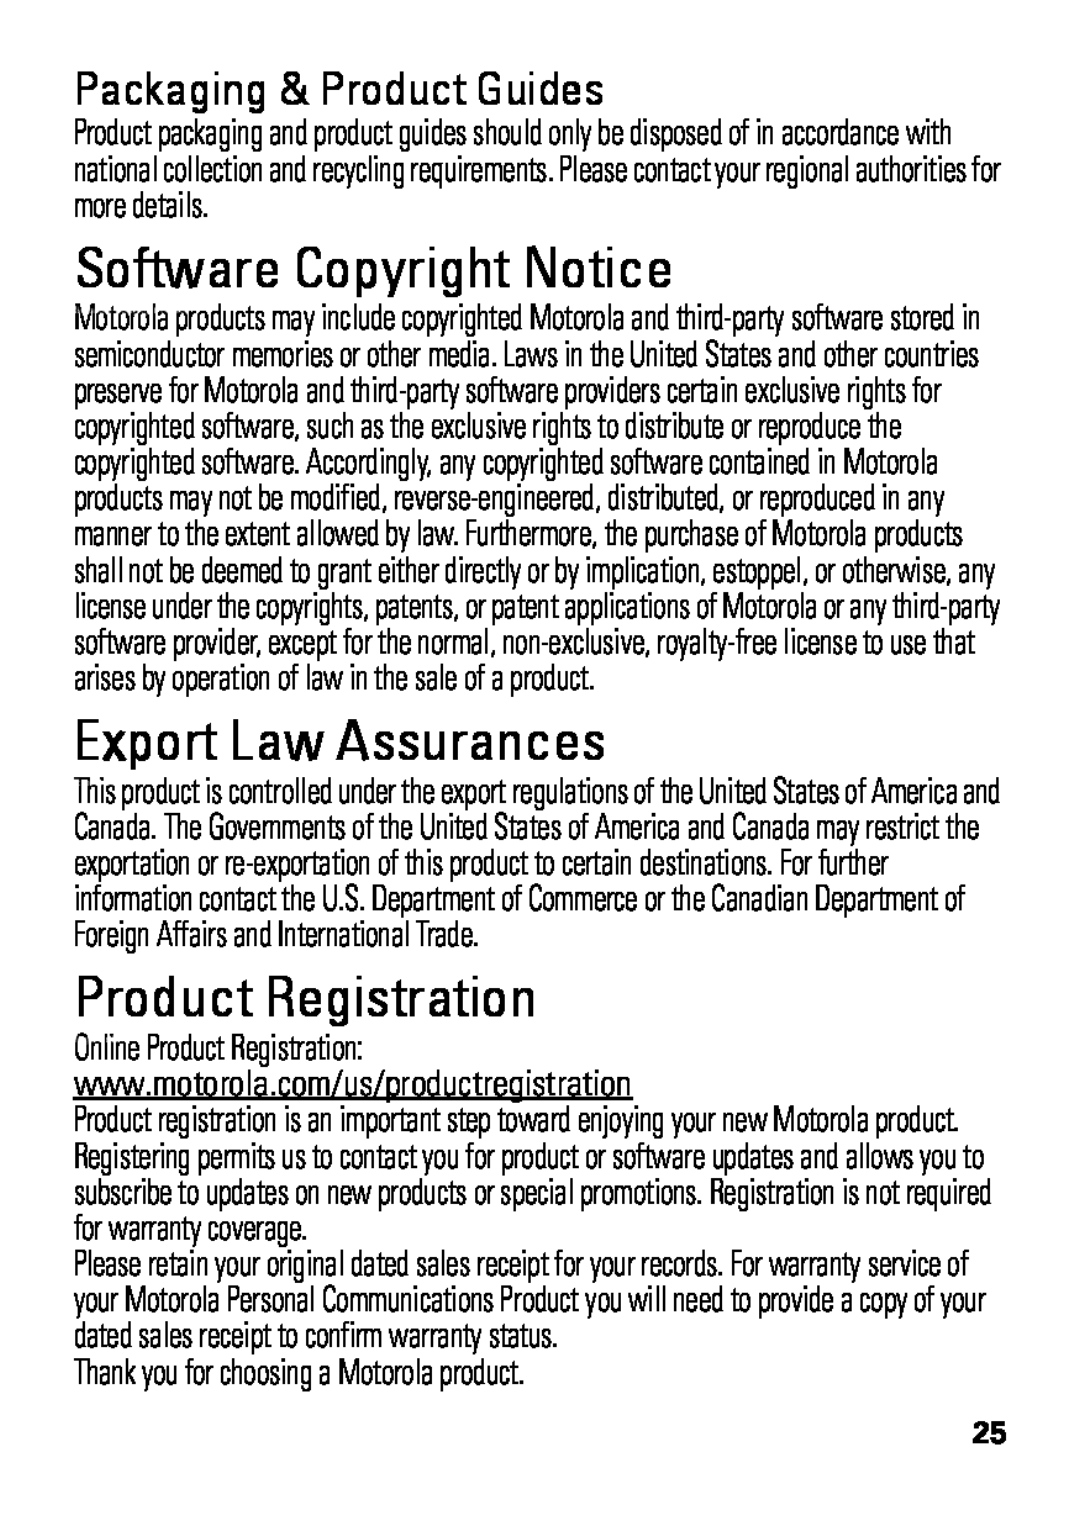 Motorola HX550 manual Software Copyright Notice, Export Law Assurances, Product Registration, Packaging & Product Guides 